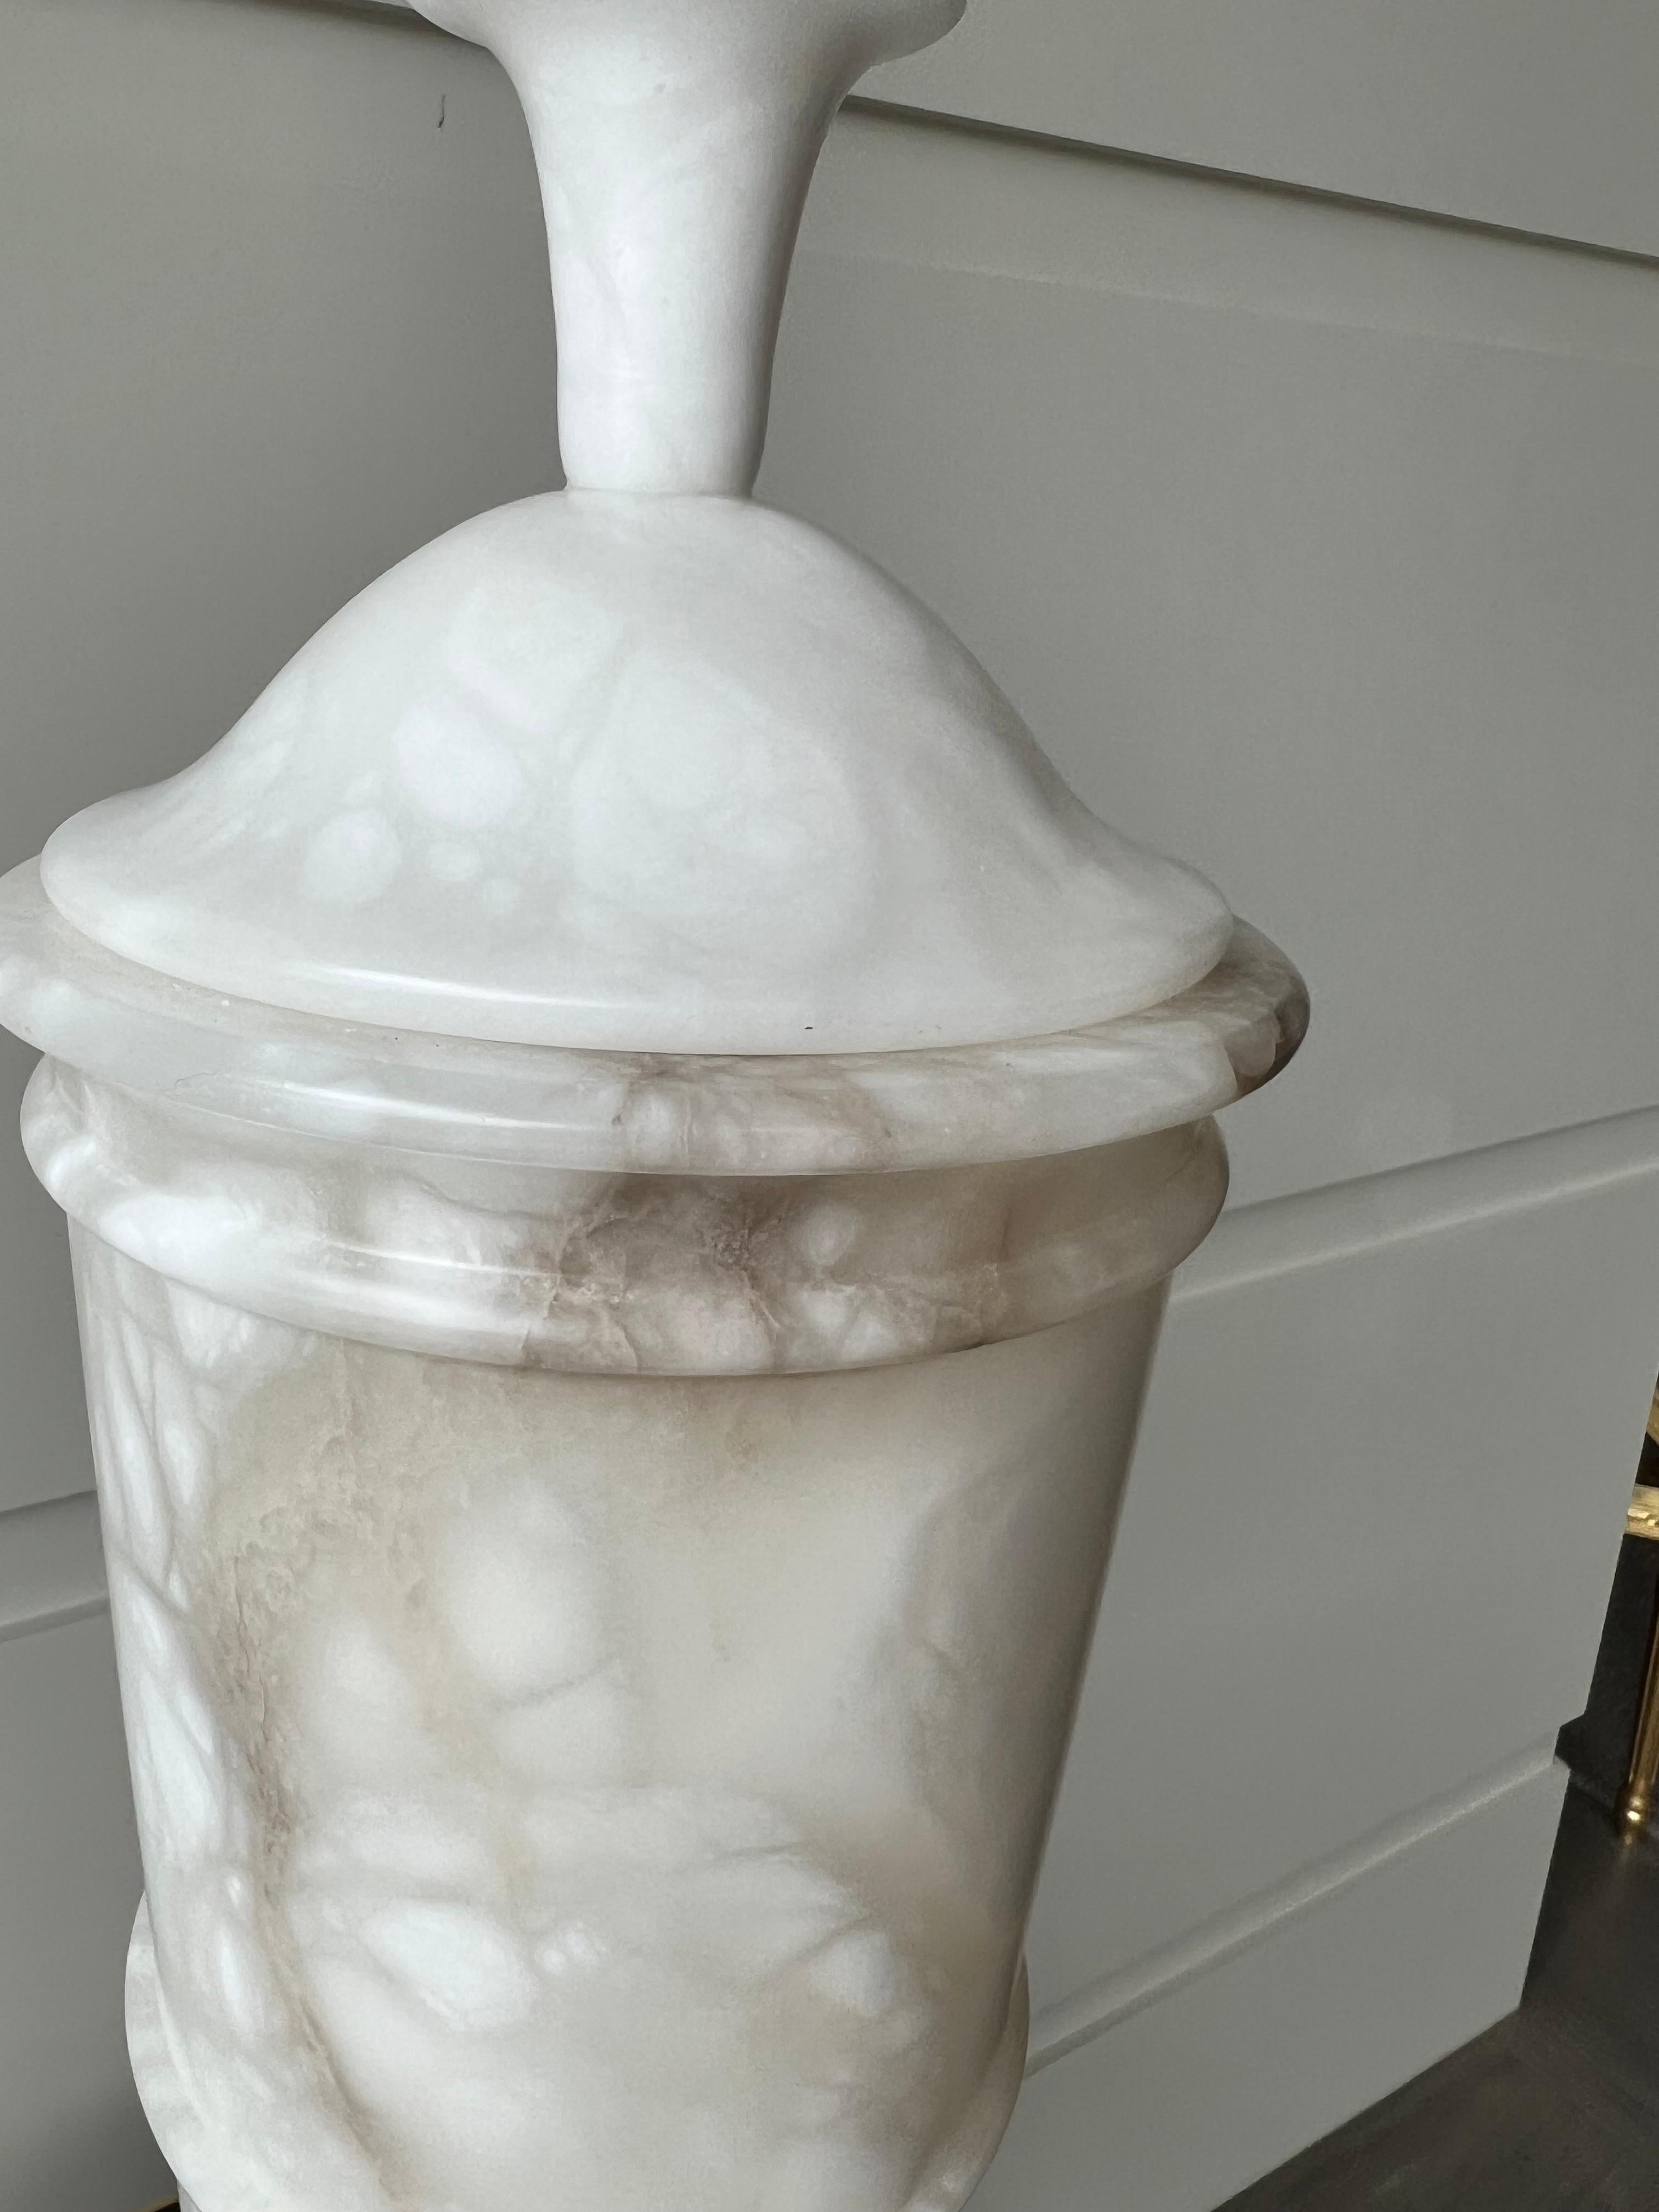 This beautiful carved lidded alabaster tall urn has a light source inside that glows through the white veined alabaster.
Perfect for an entry table or in a powder room for that soft old world glow.